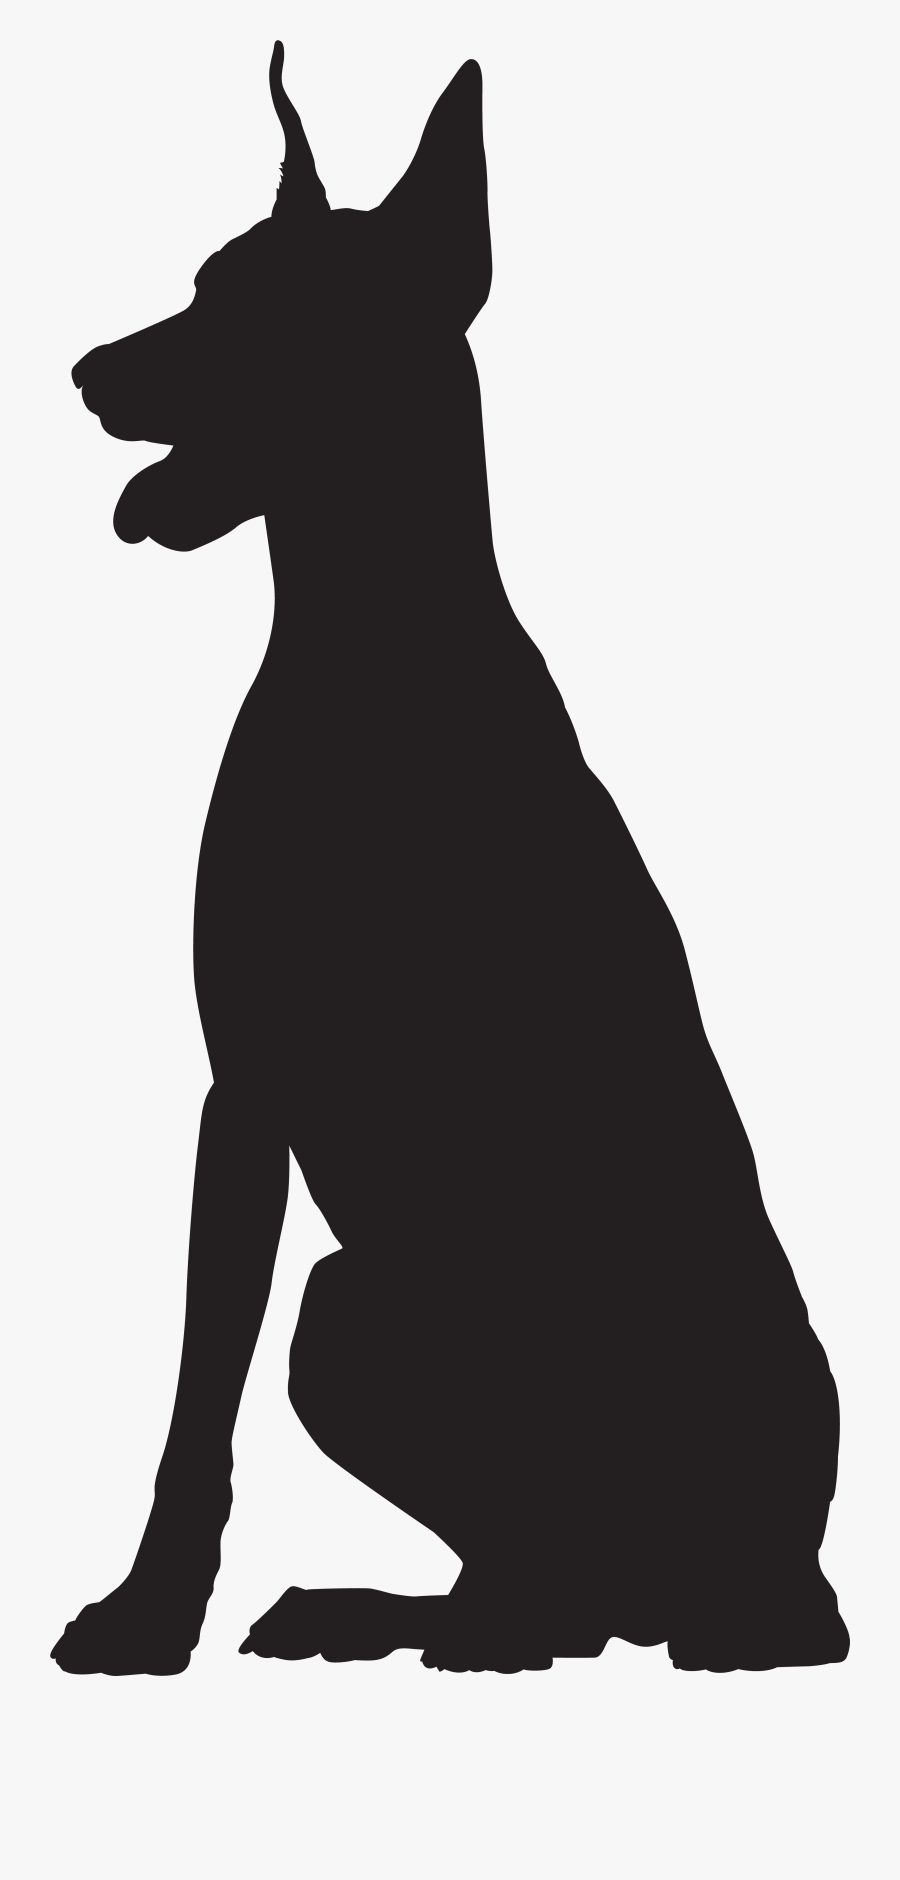 Dog Breed Black And White Snout - Great Dane Sitting Silhouette, Transparent Clipart